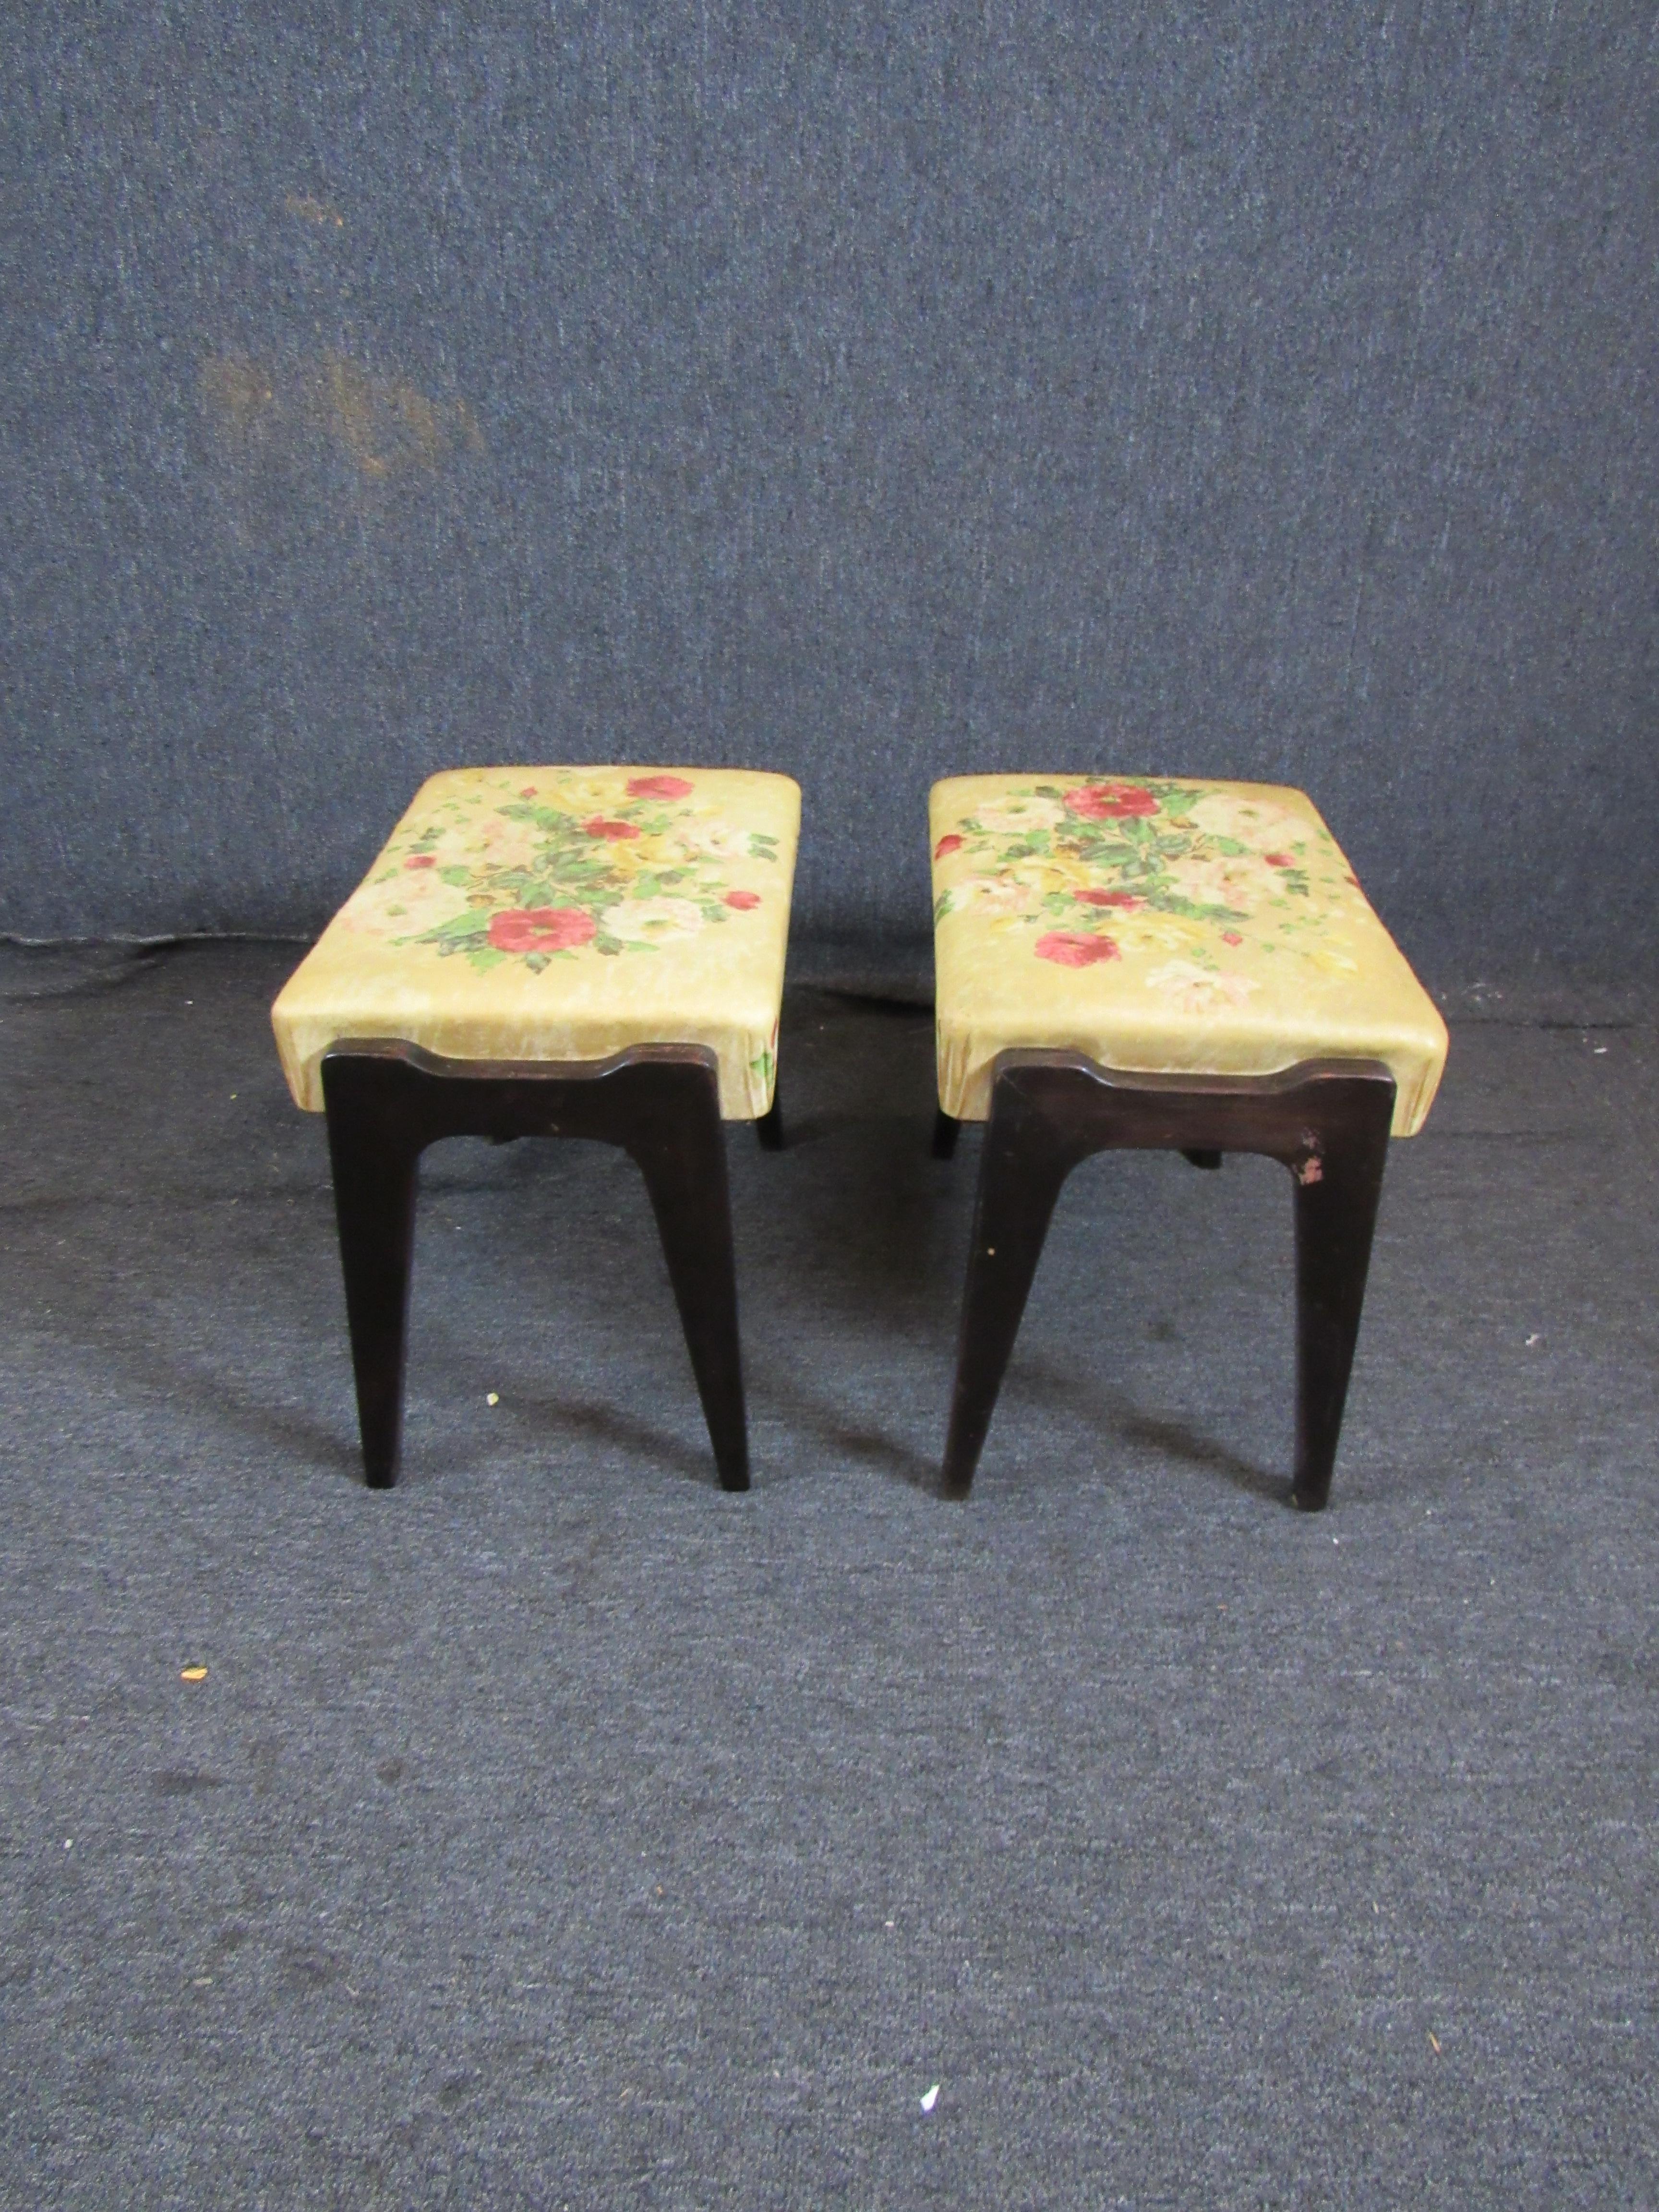 Pair of Vintage Floral Ottomans In Good Condition For Sale In Brooklyn, NY